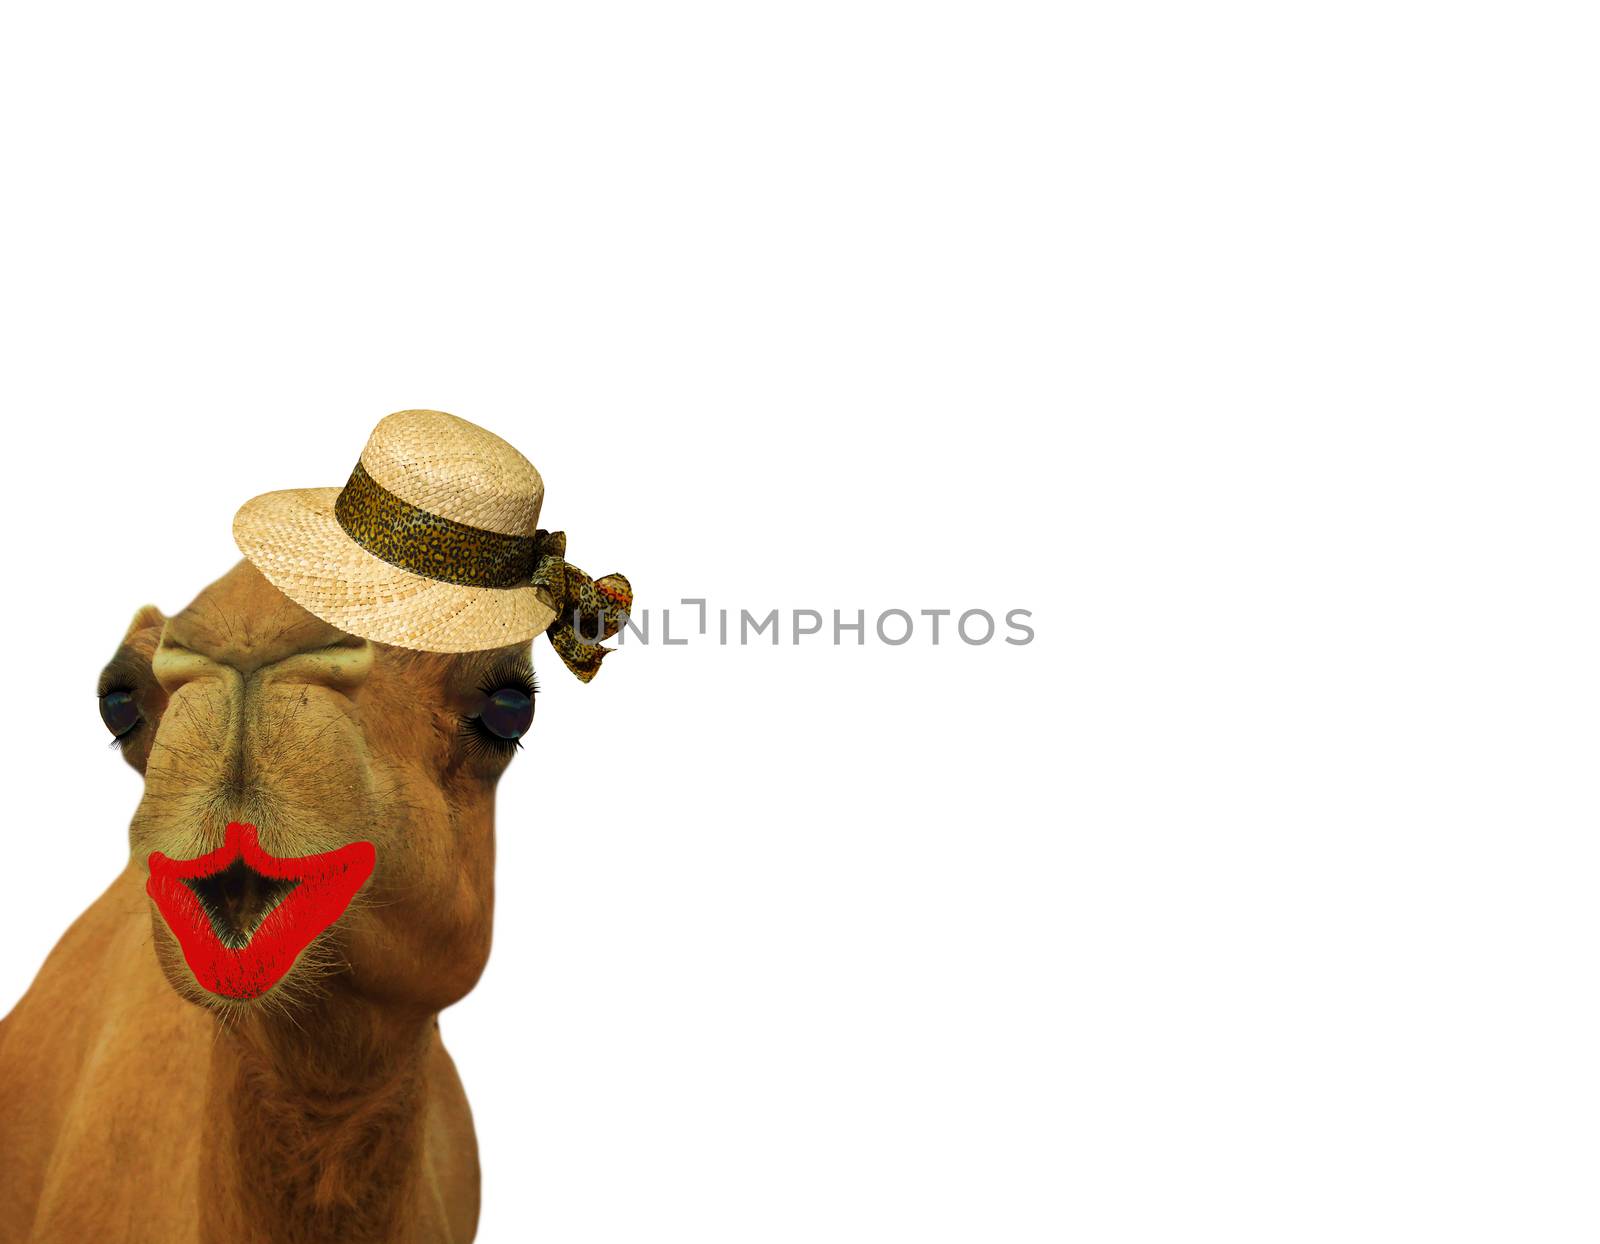 very funny camel wearing makeup and a straw hat isolated on a white background by charlottebleijenberg